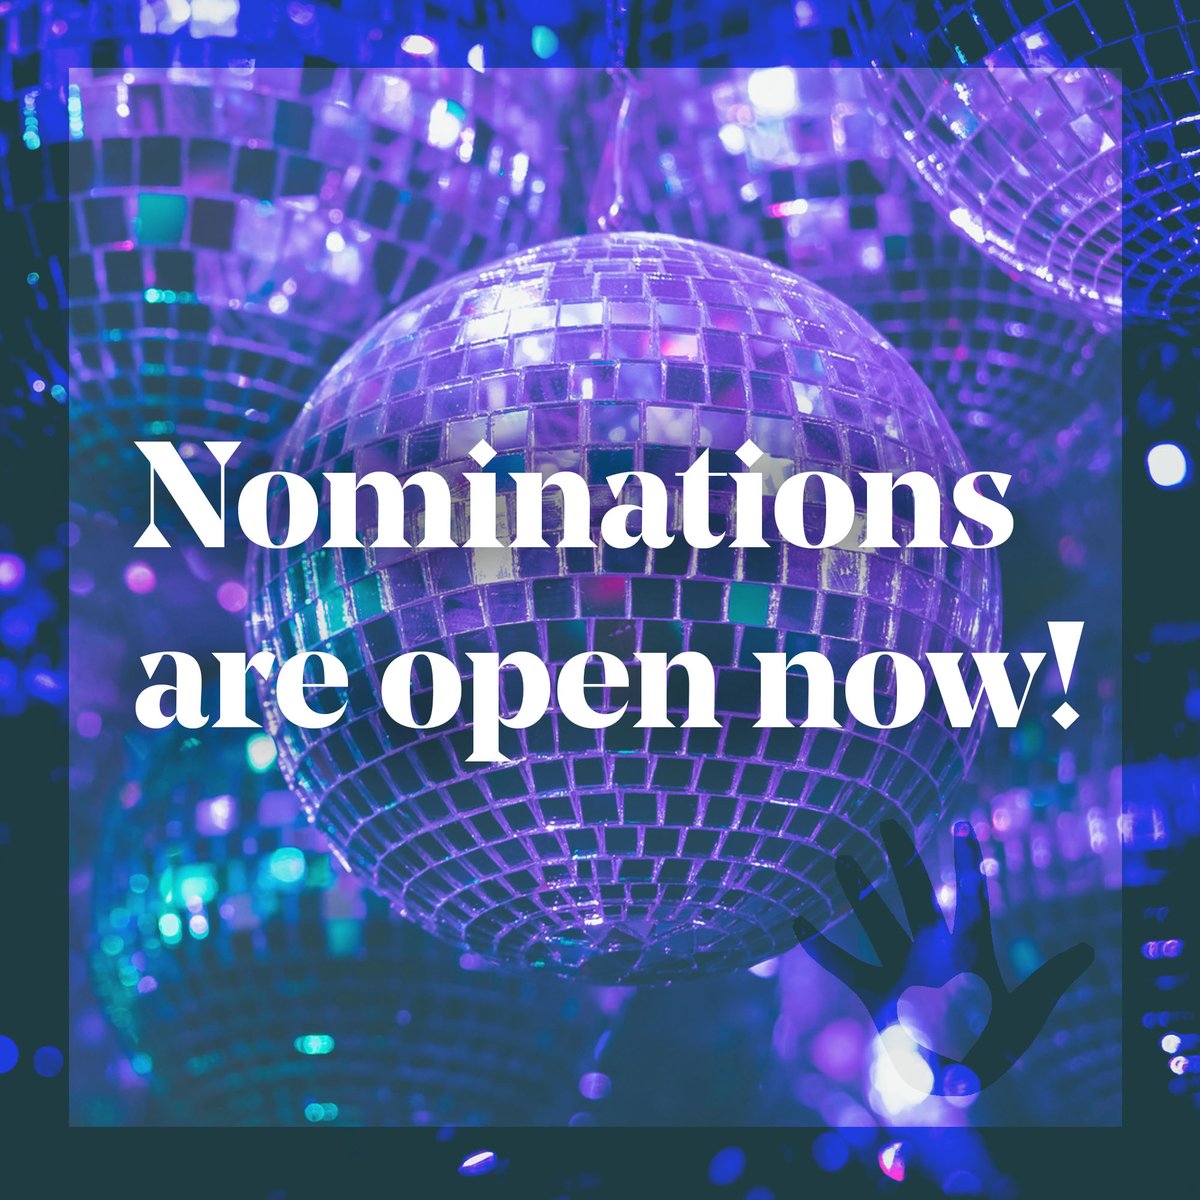 It's been three months since we officially opened nominations for our Awards evening in October. There are so many deserving children that we'd like to recognise. You can nominate a child or young adult to win an Award in any of the categories by visiting yorkshirechildrenofcourage.com